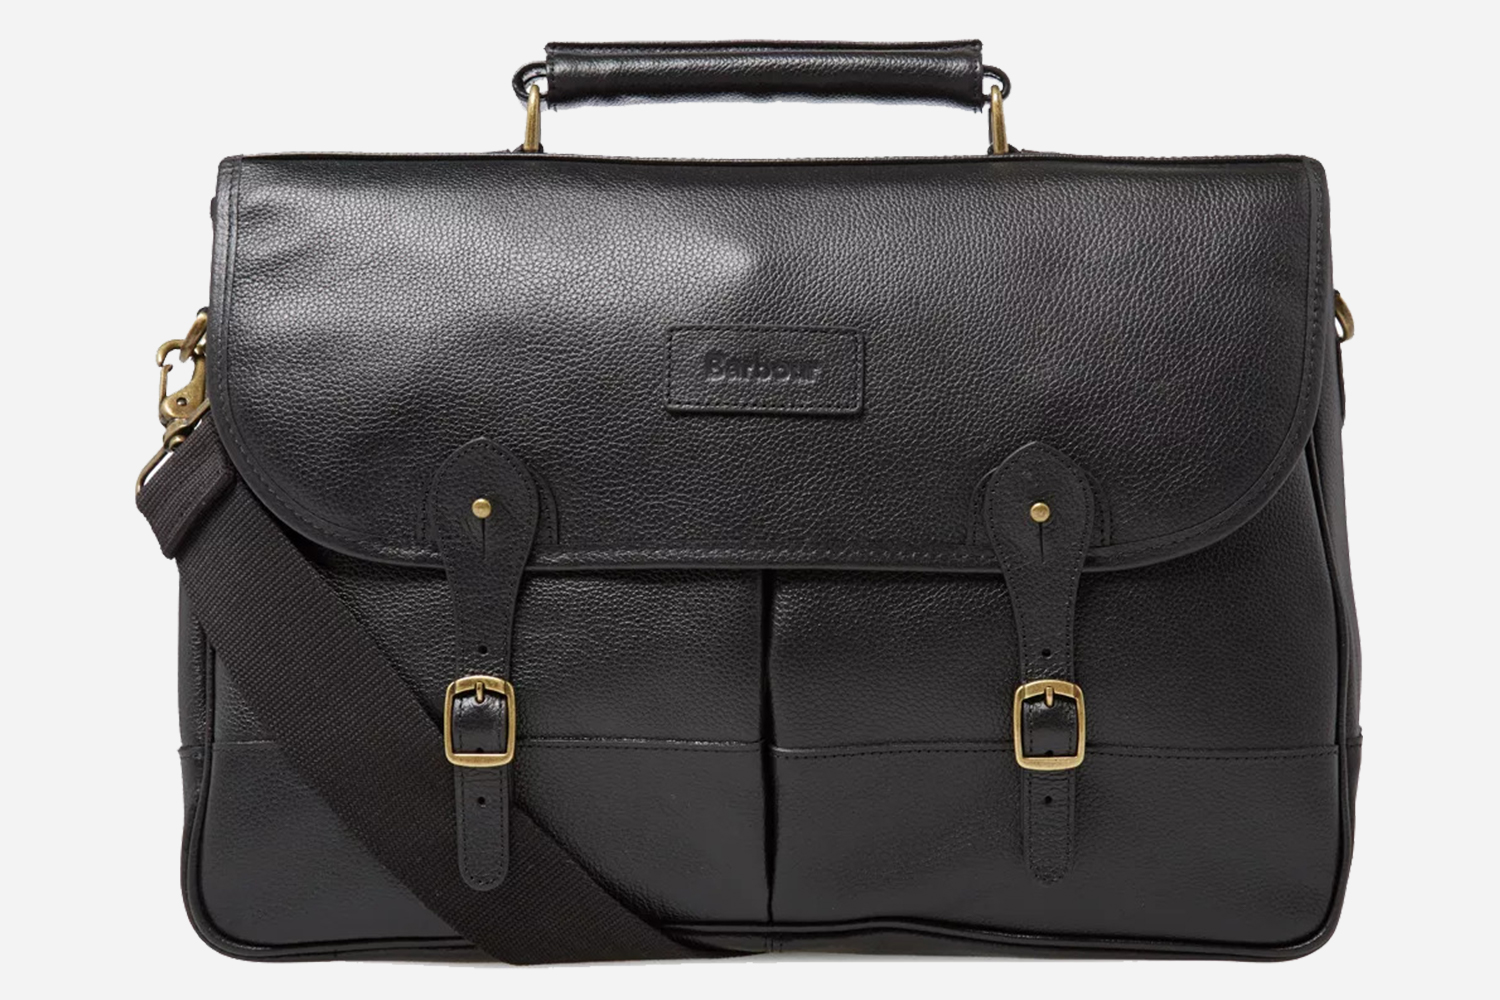 Barbour Sale at End Clothing Black Leather Briefcases